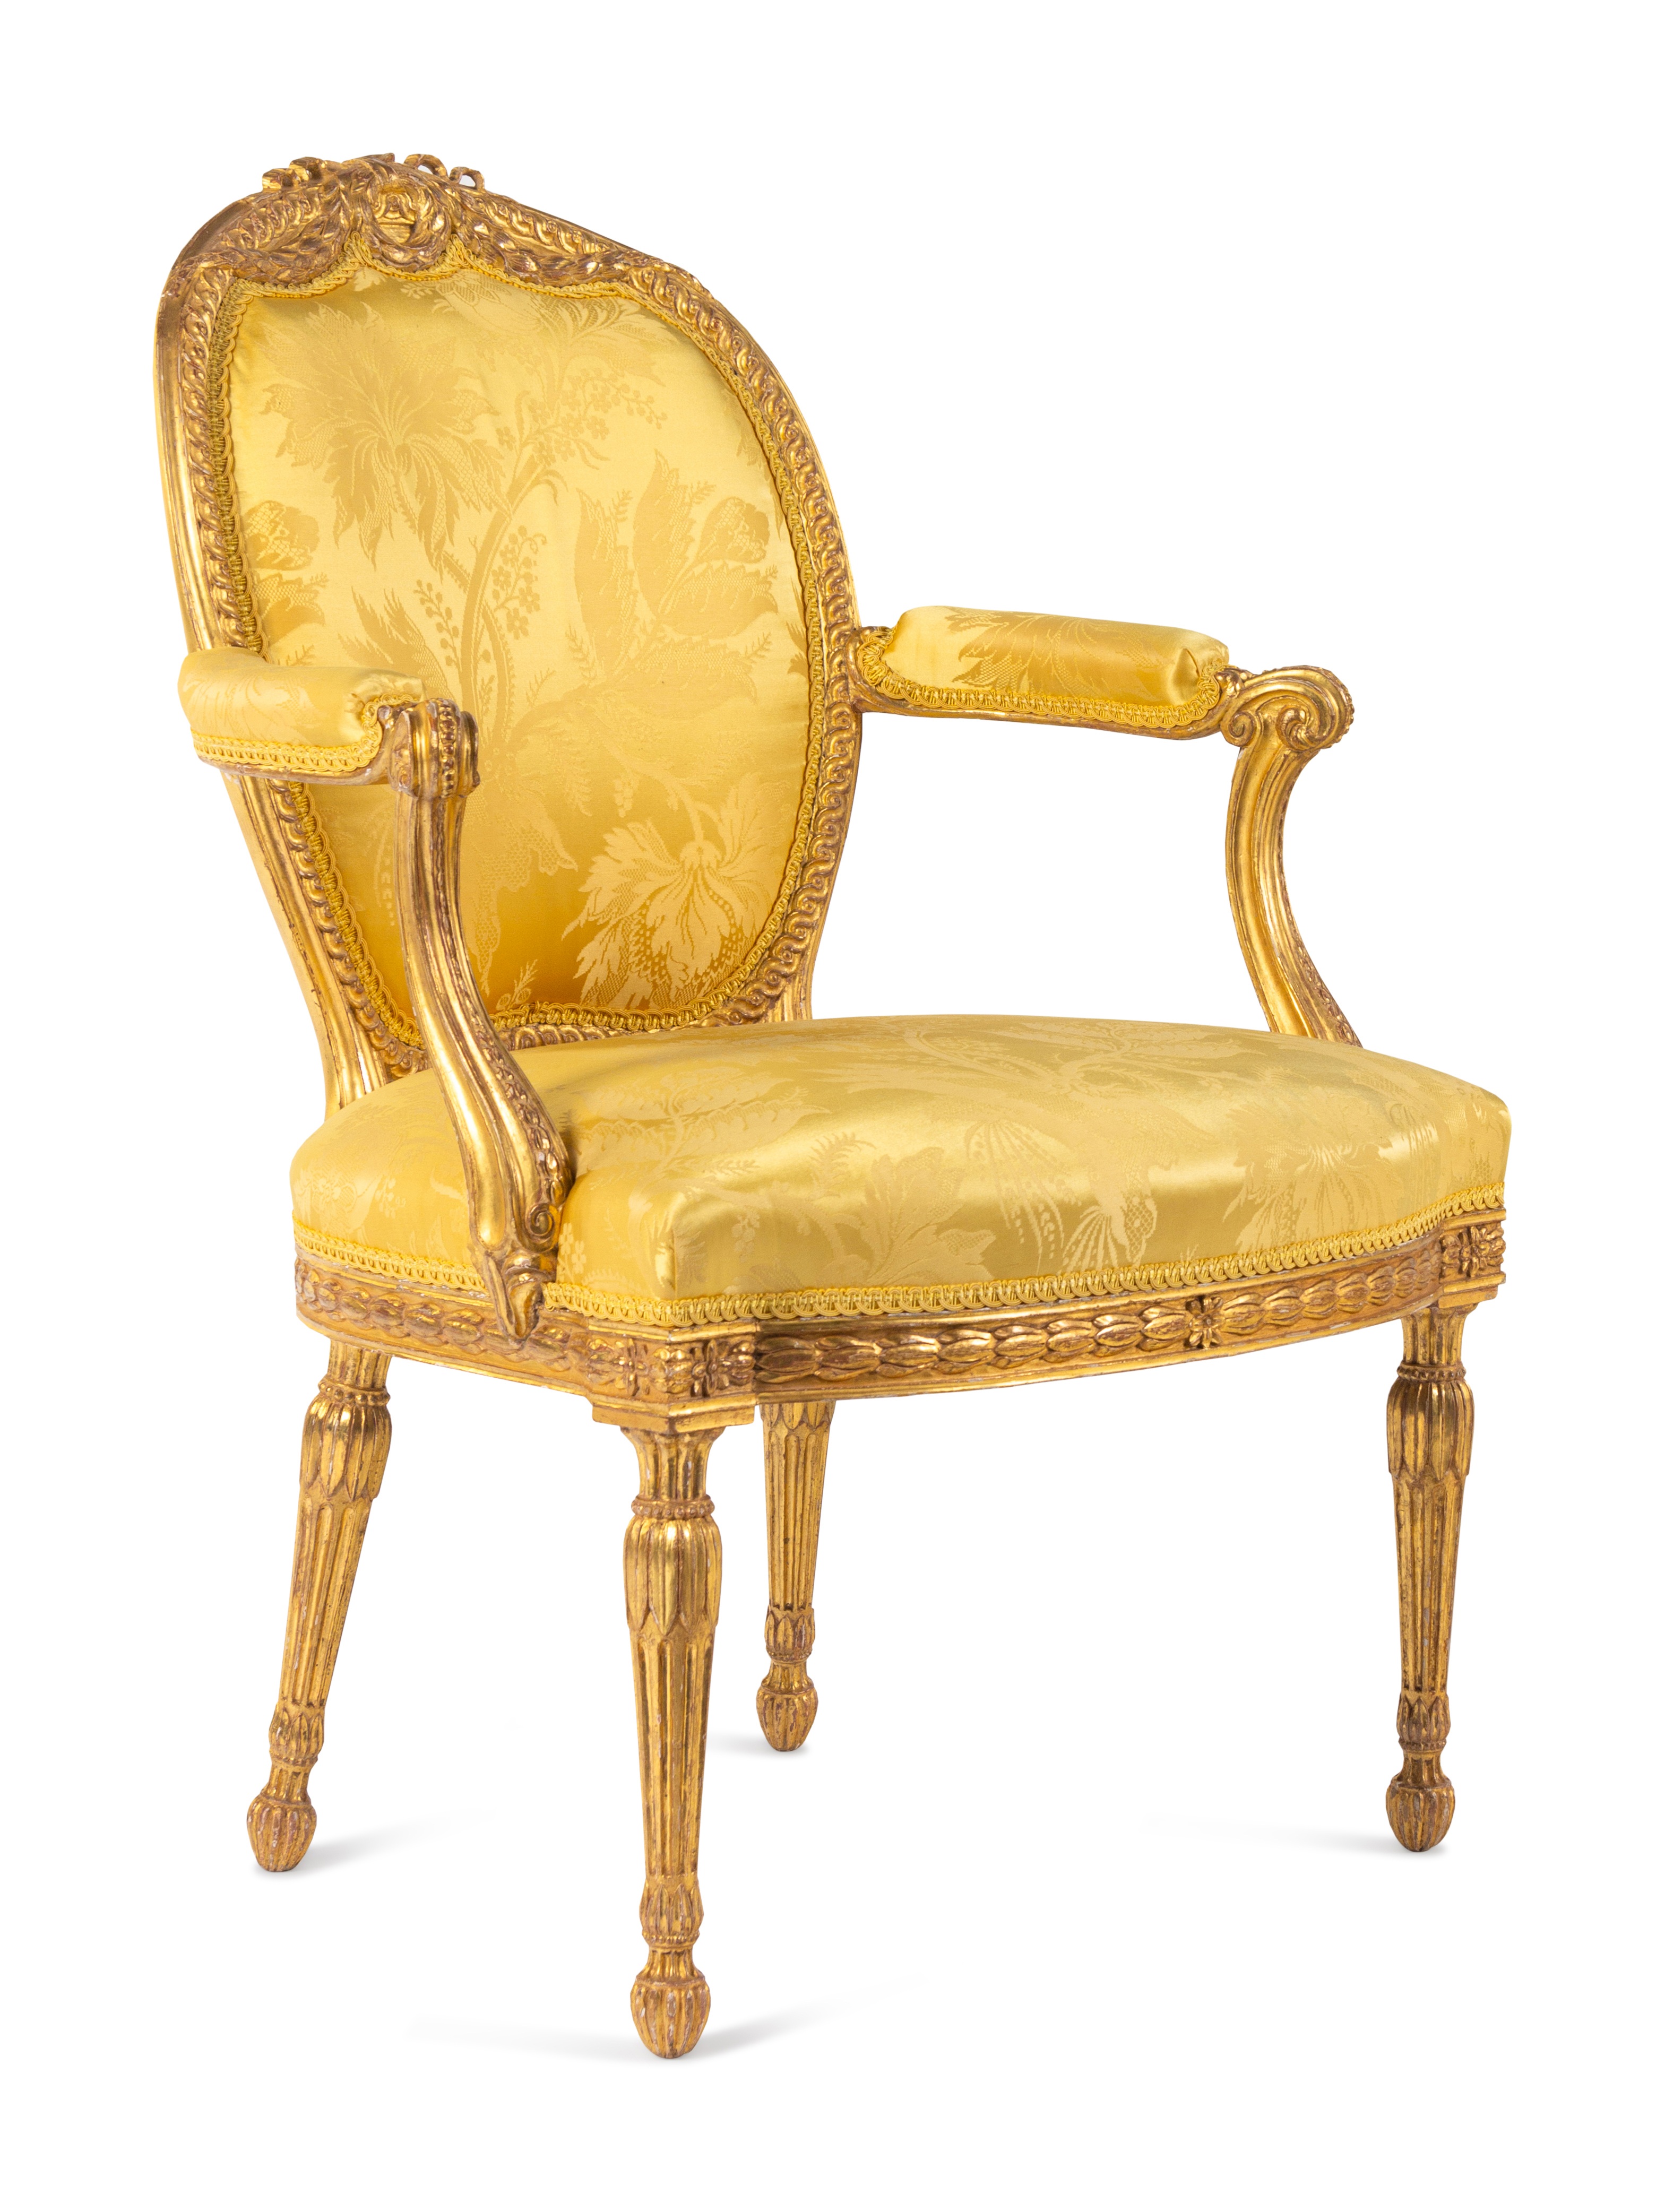 A Pair of George III Carved Giltwood Armchairs - Image 2 of 14